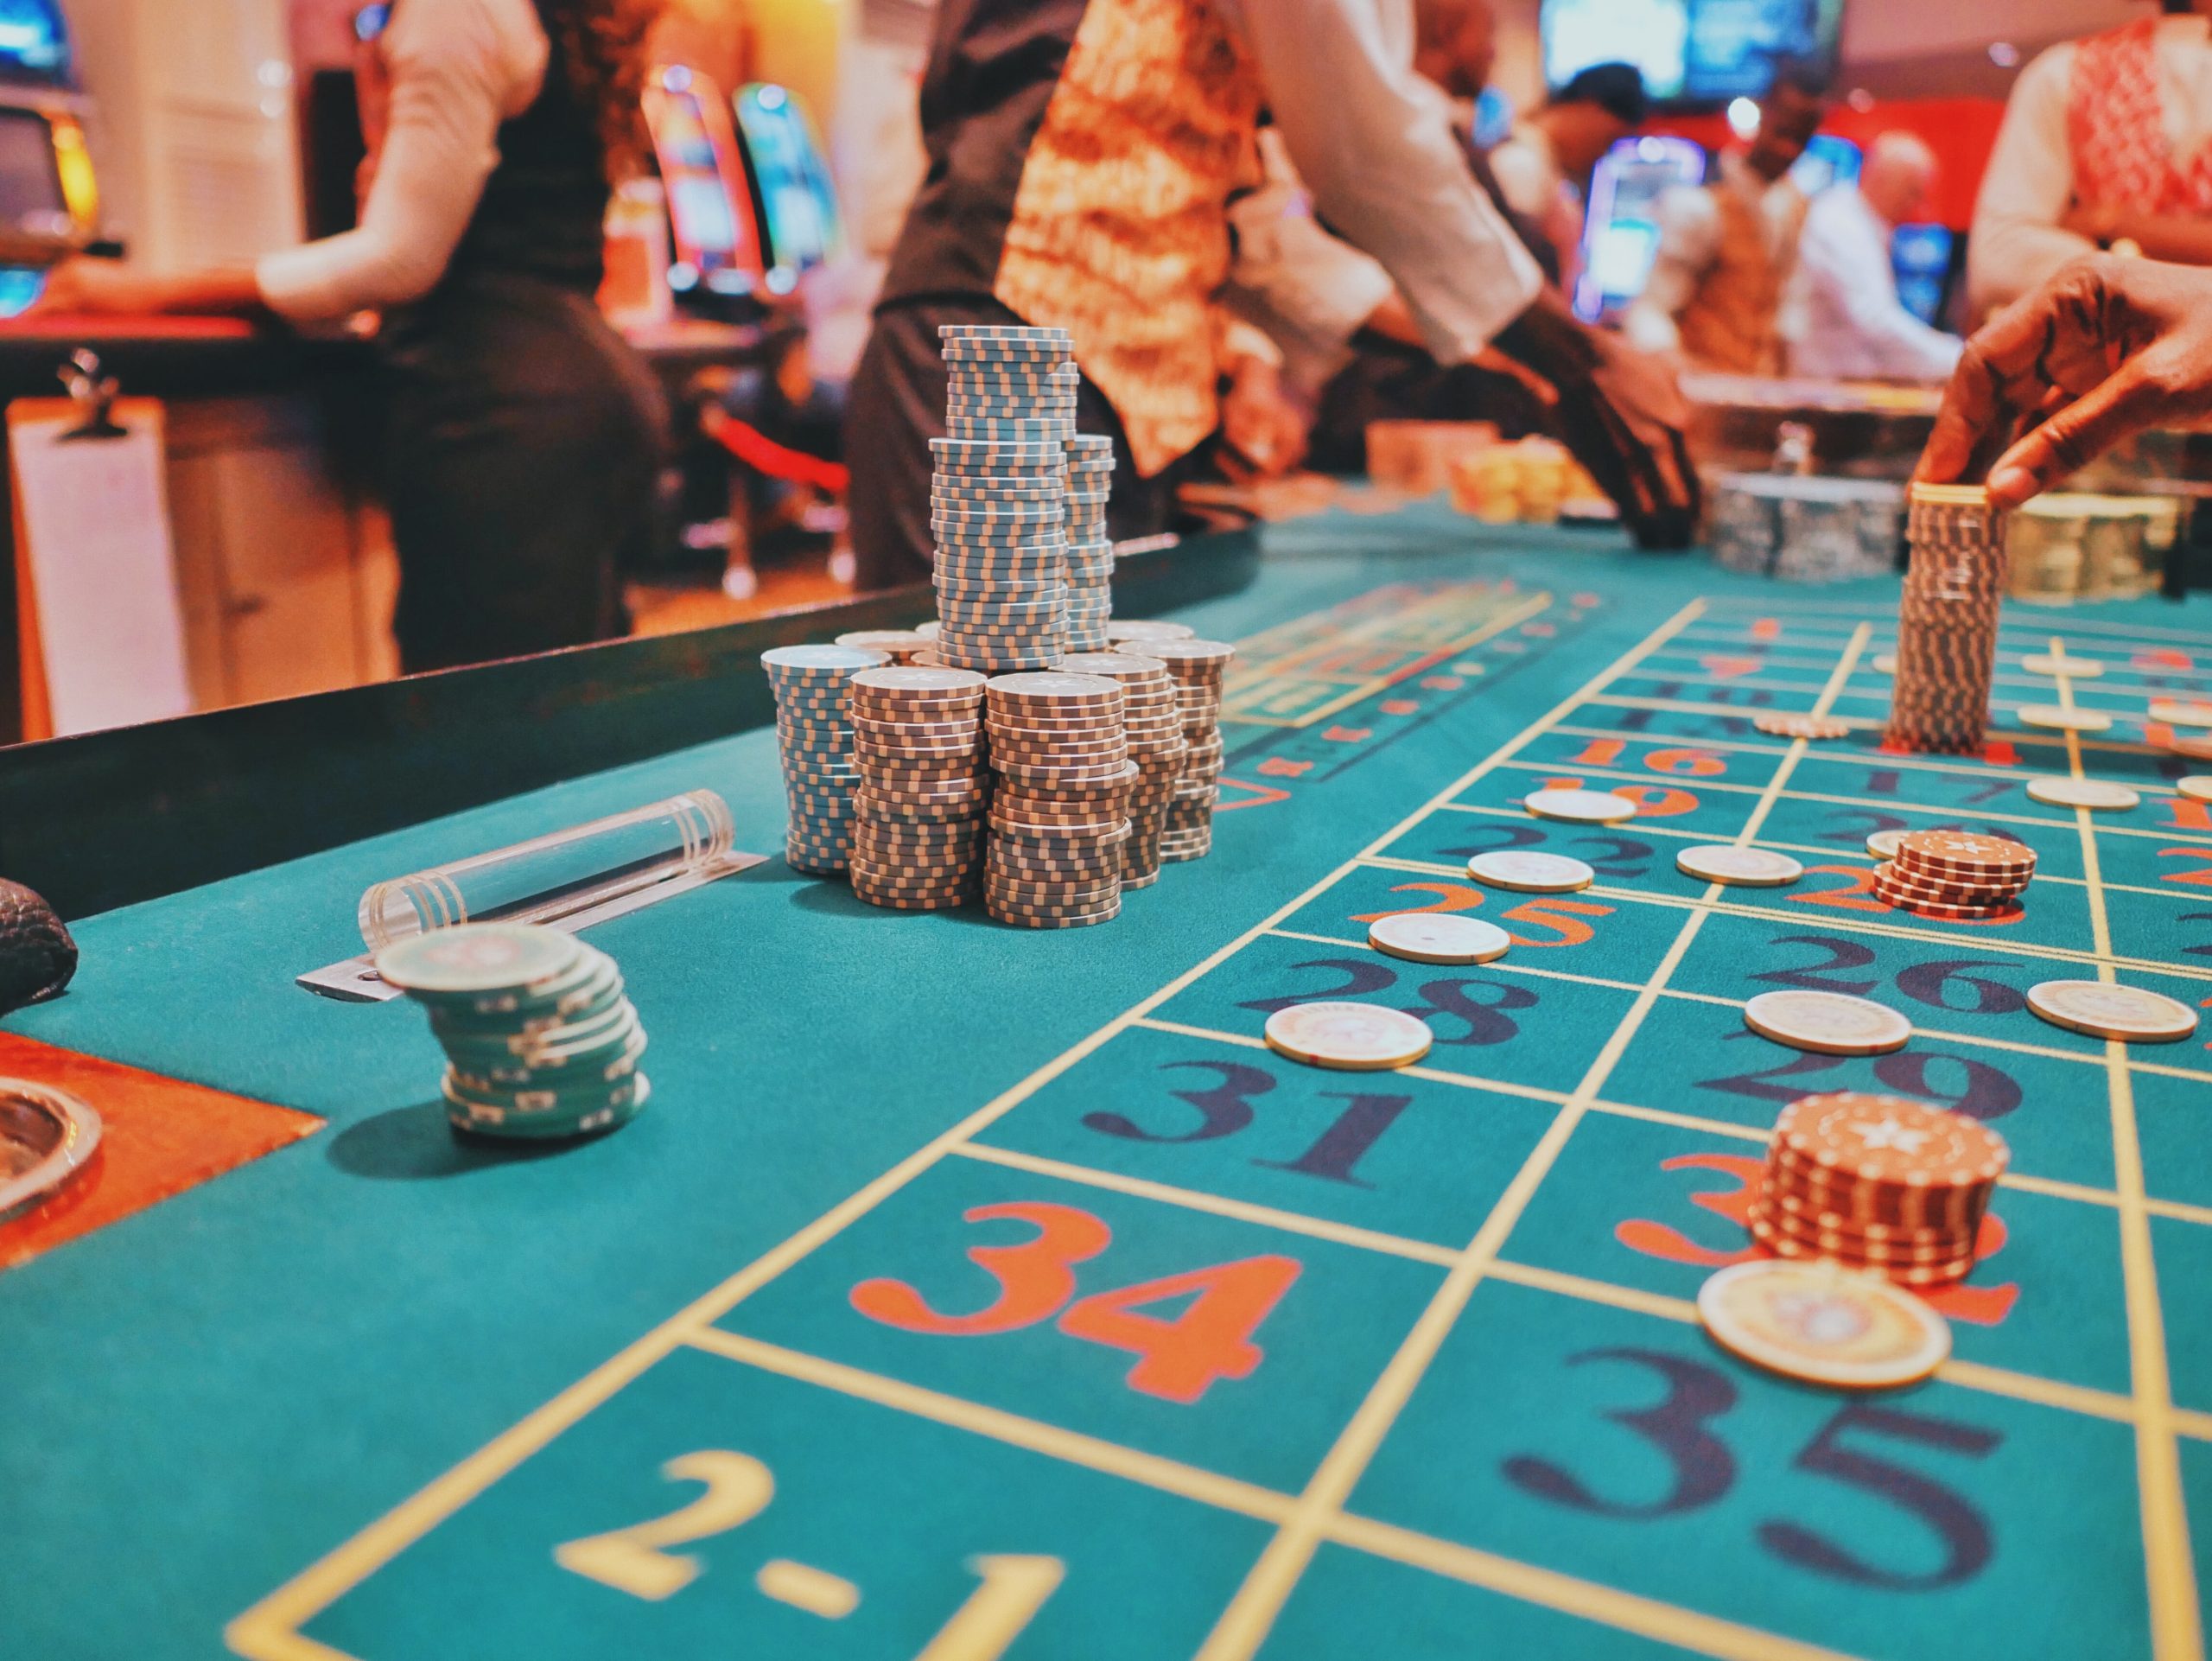 How can I read reviews and experiences about casinos?